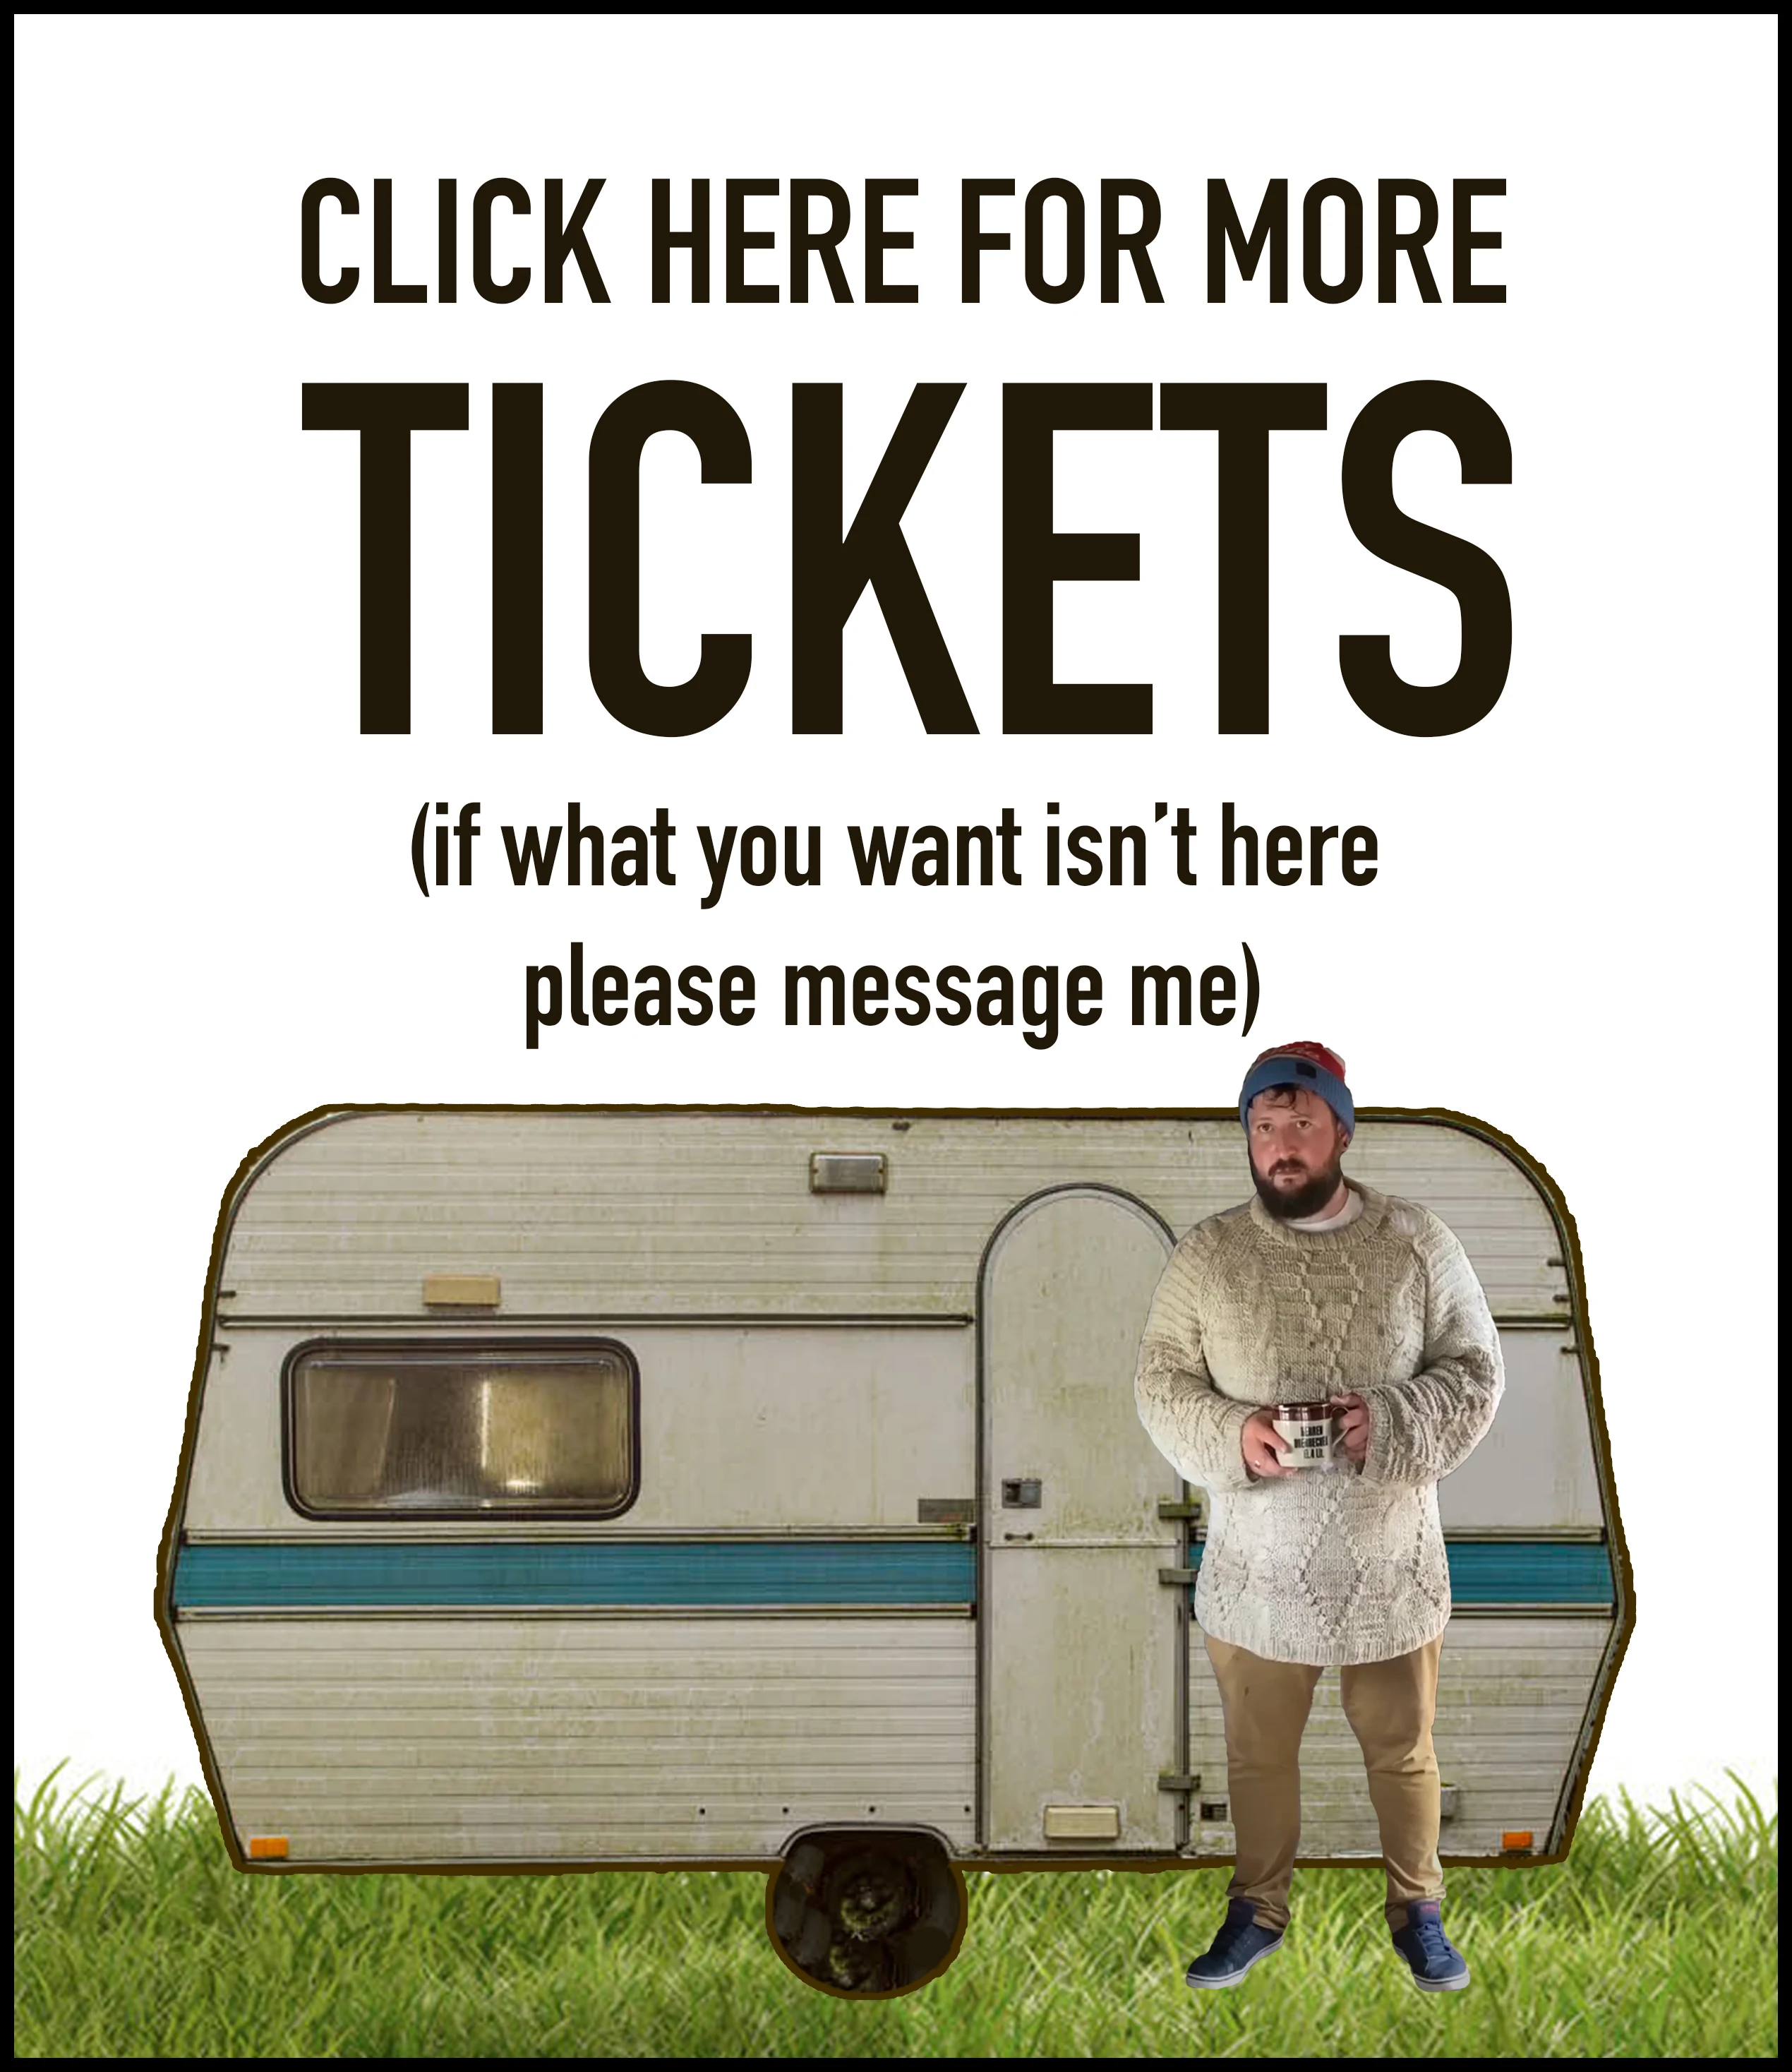 1922-ticketsphone-17097625199845.png